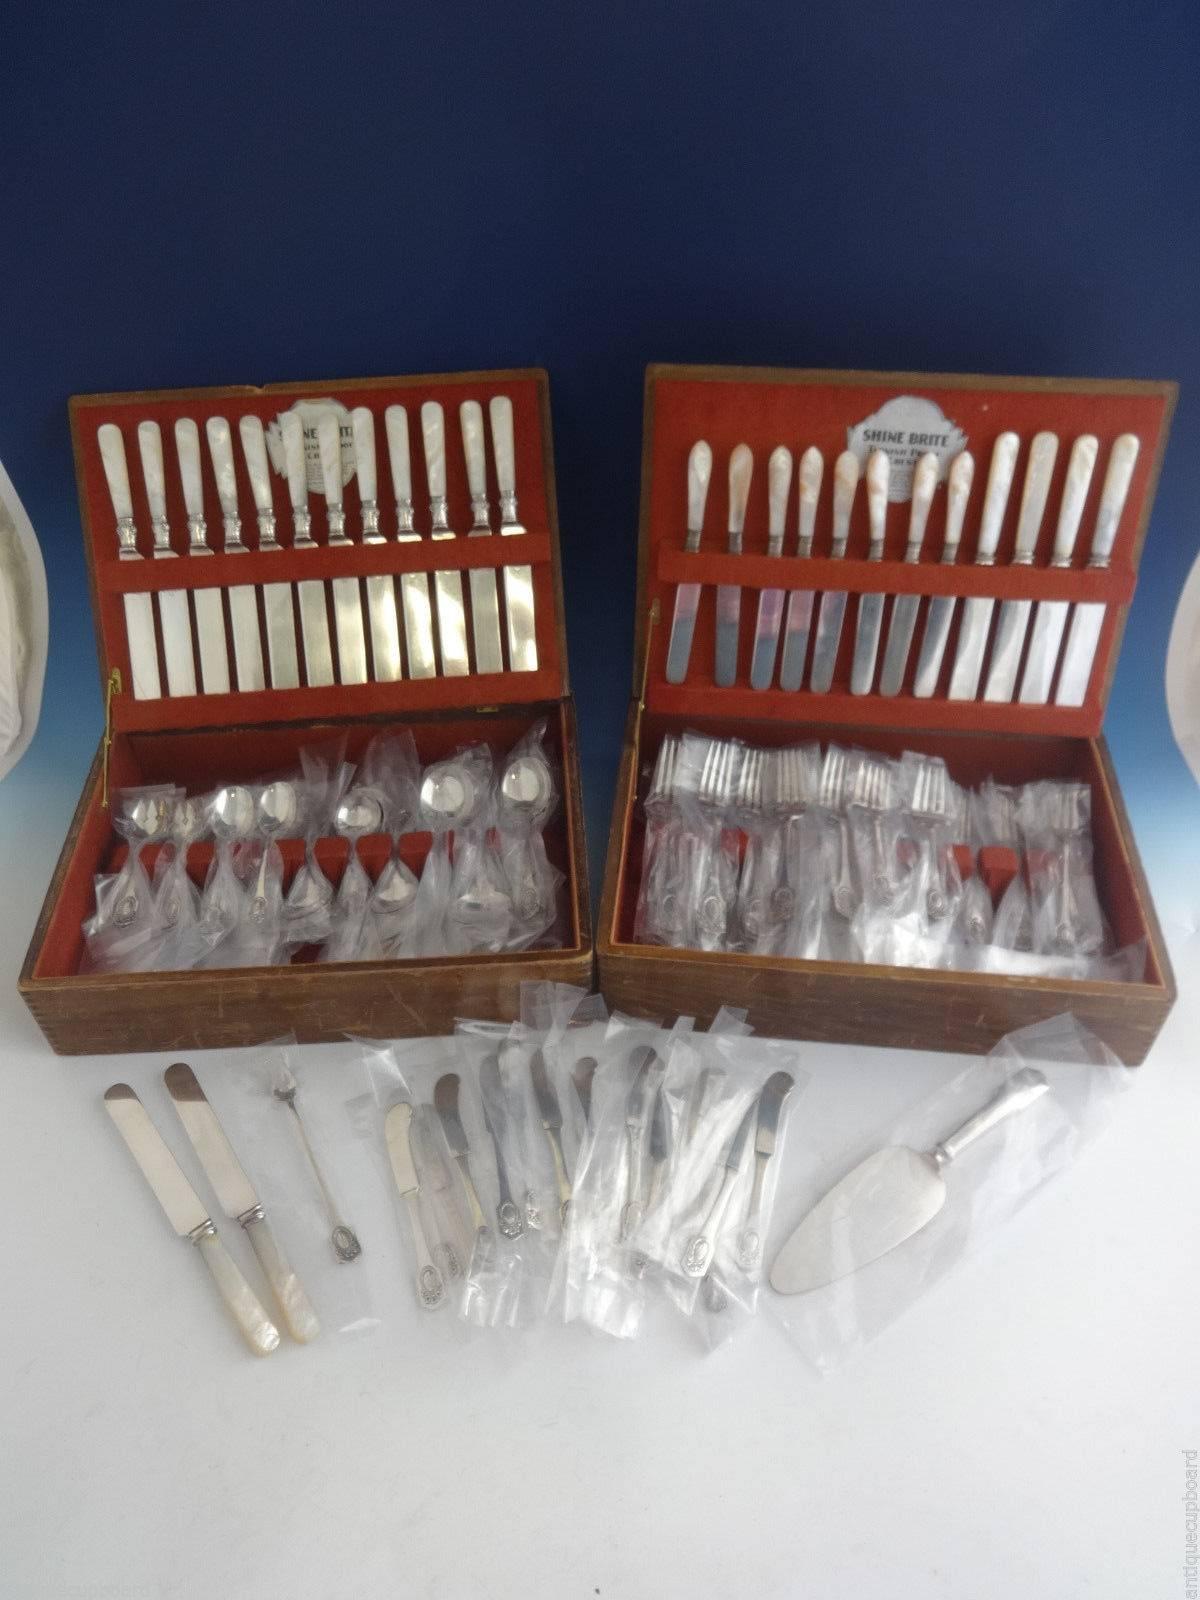 Exceptional Louis XVI by Shreve sterling silver dinner size flatware set of 197 pieces.

This beautiful single owner monumental estate set comes to you in two vintage boxes. Lovely rare pattern with bow and wreath acid etched 